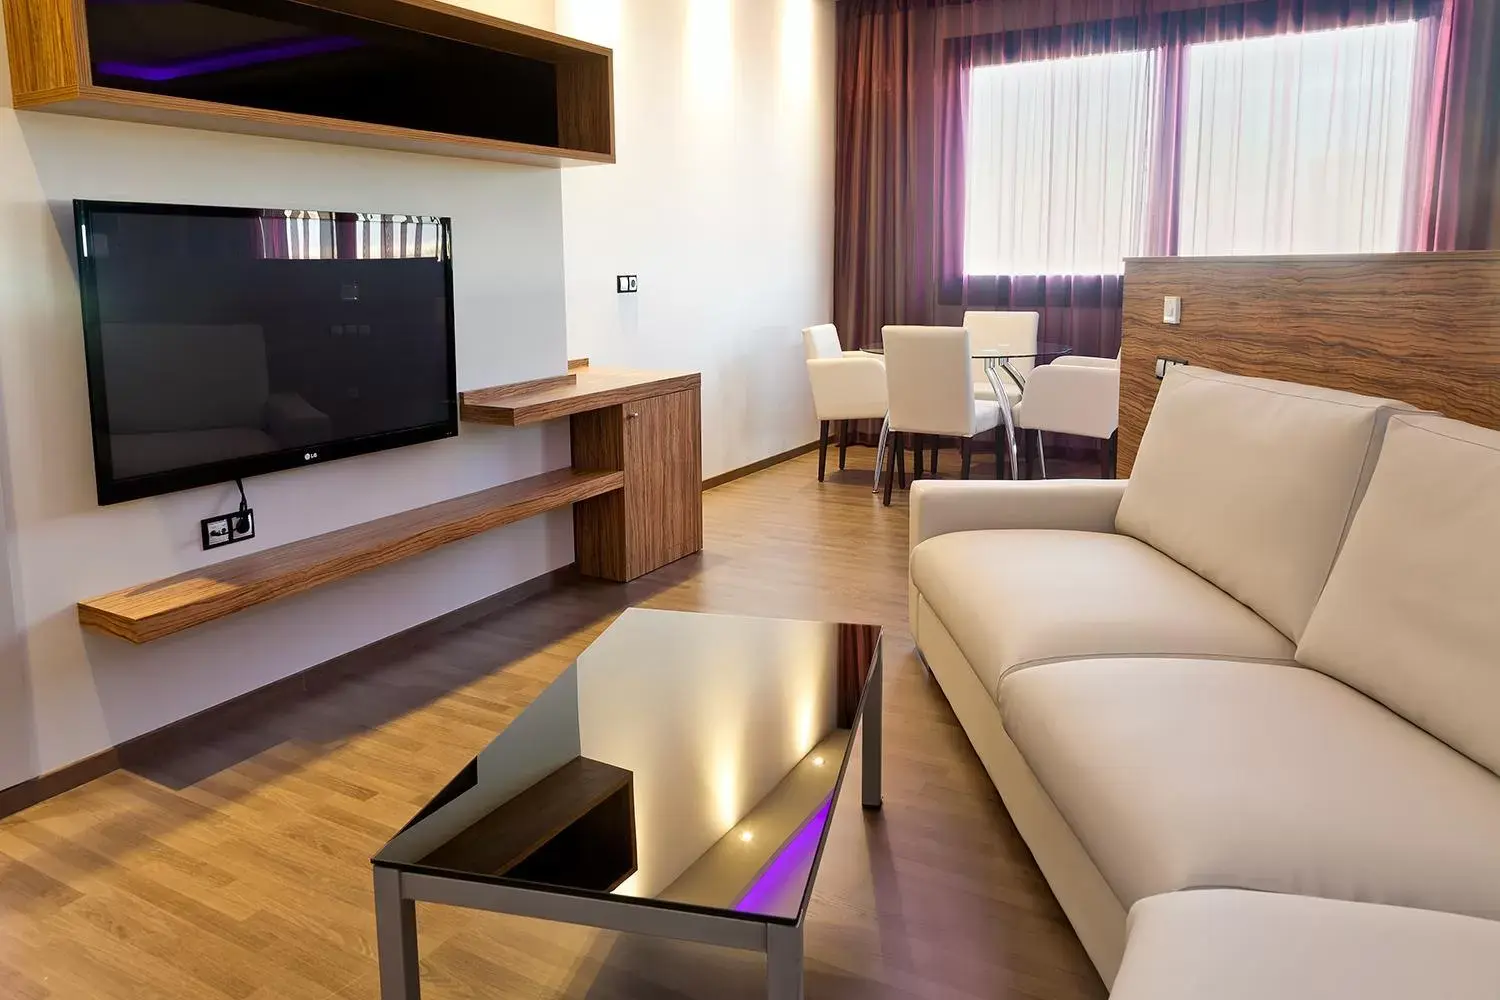 TV and multimedia, TV/Entertainment Center in Dña Monse Hotel Spa & Golf